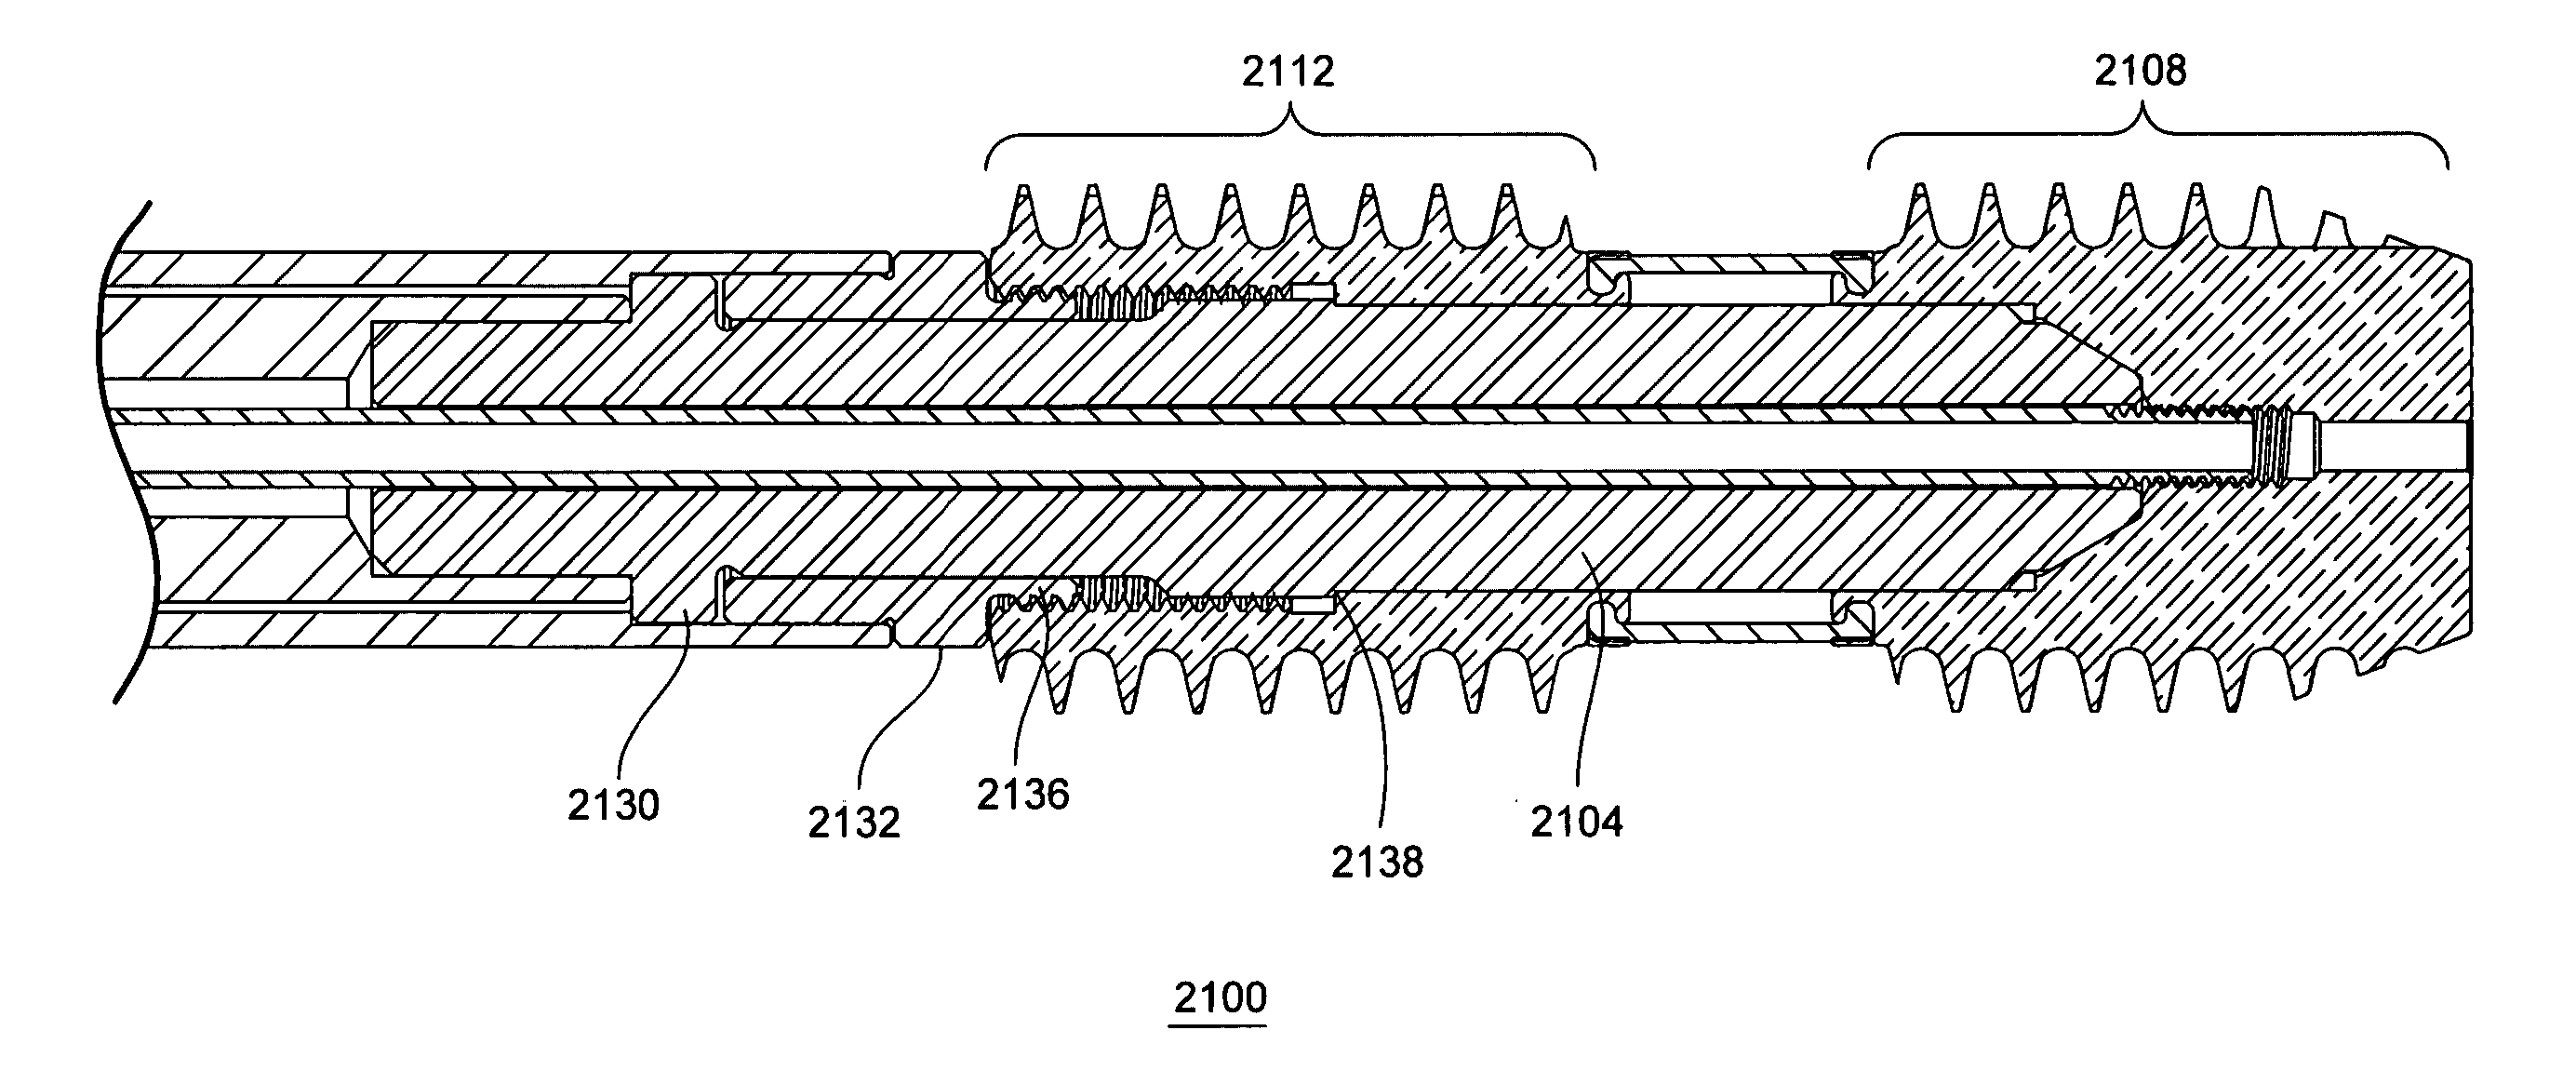 Driver assembly for simultaneous axial delivery of spinal implants